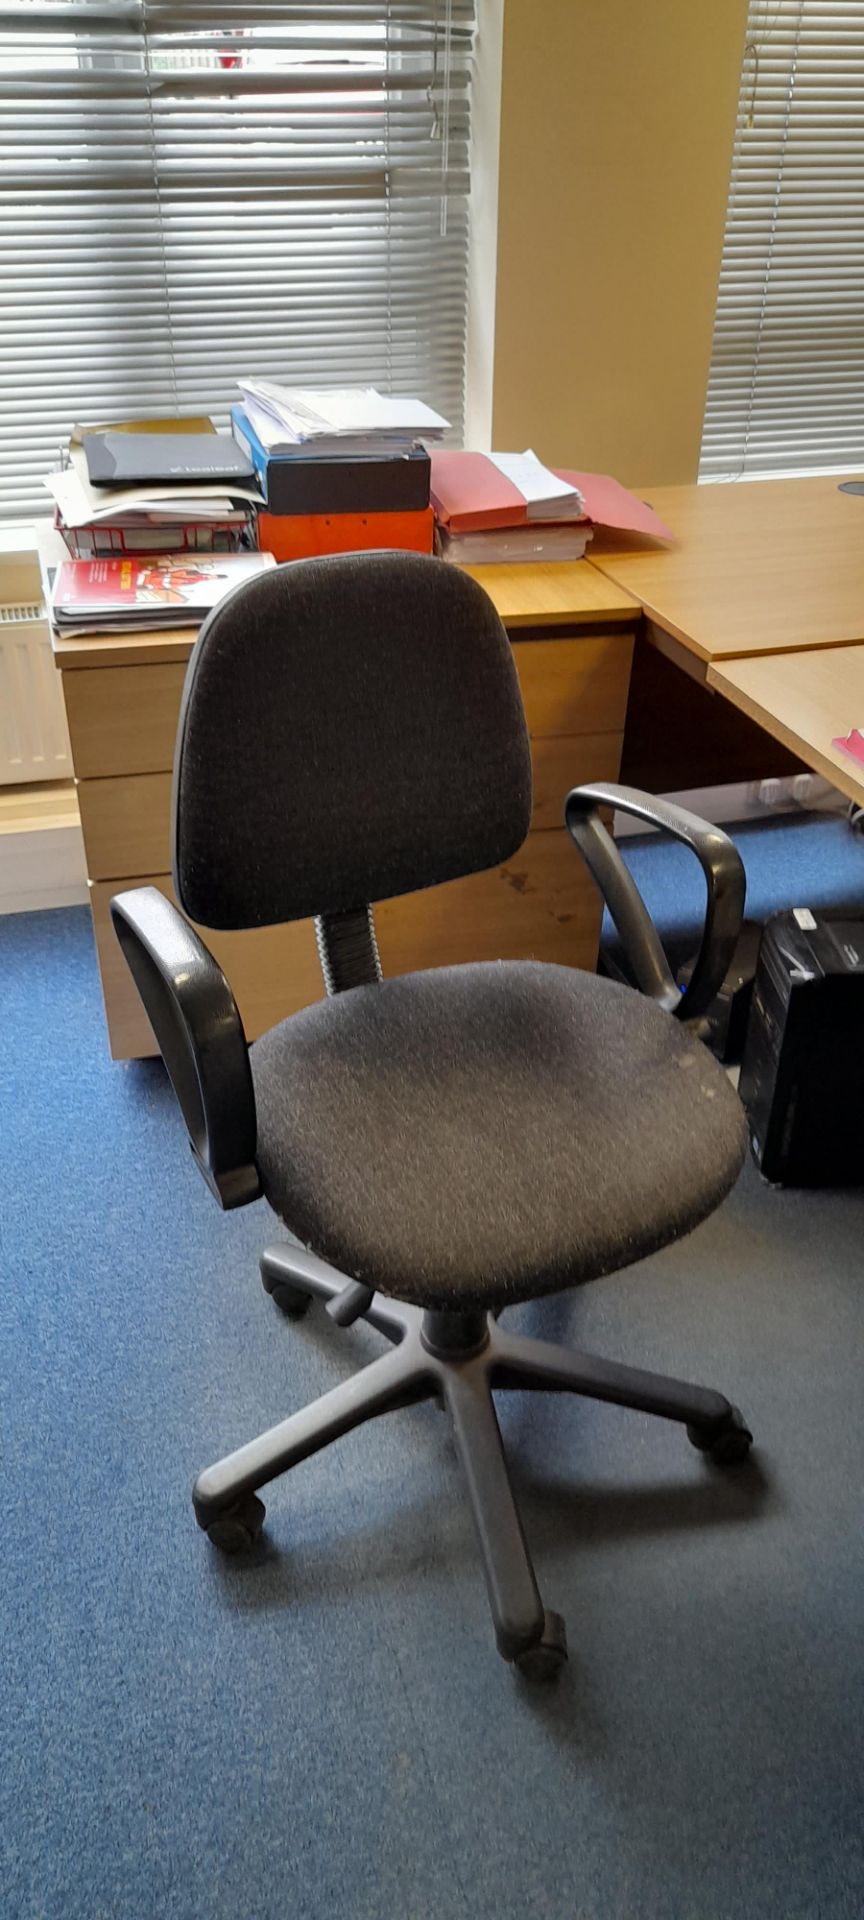 4x Adjustable black mobile office chairs - Image 3 of 4